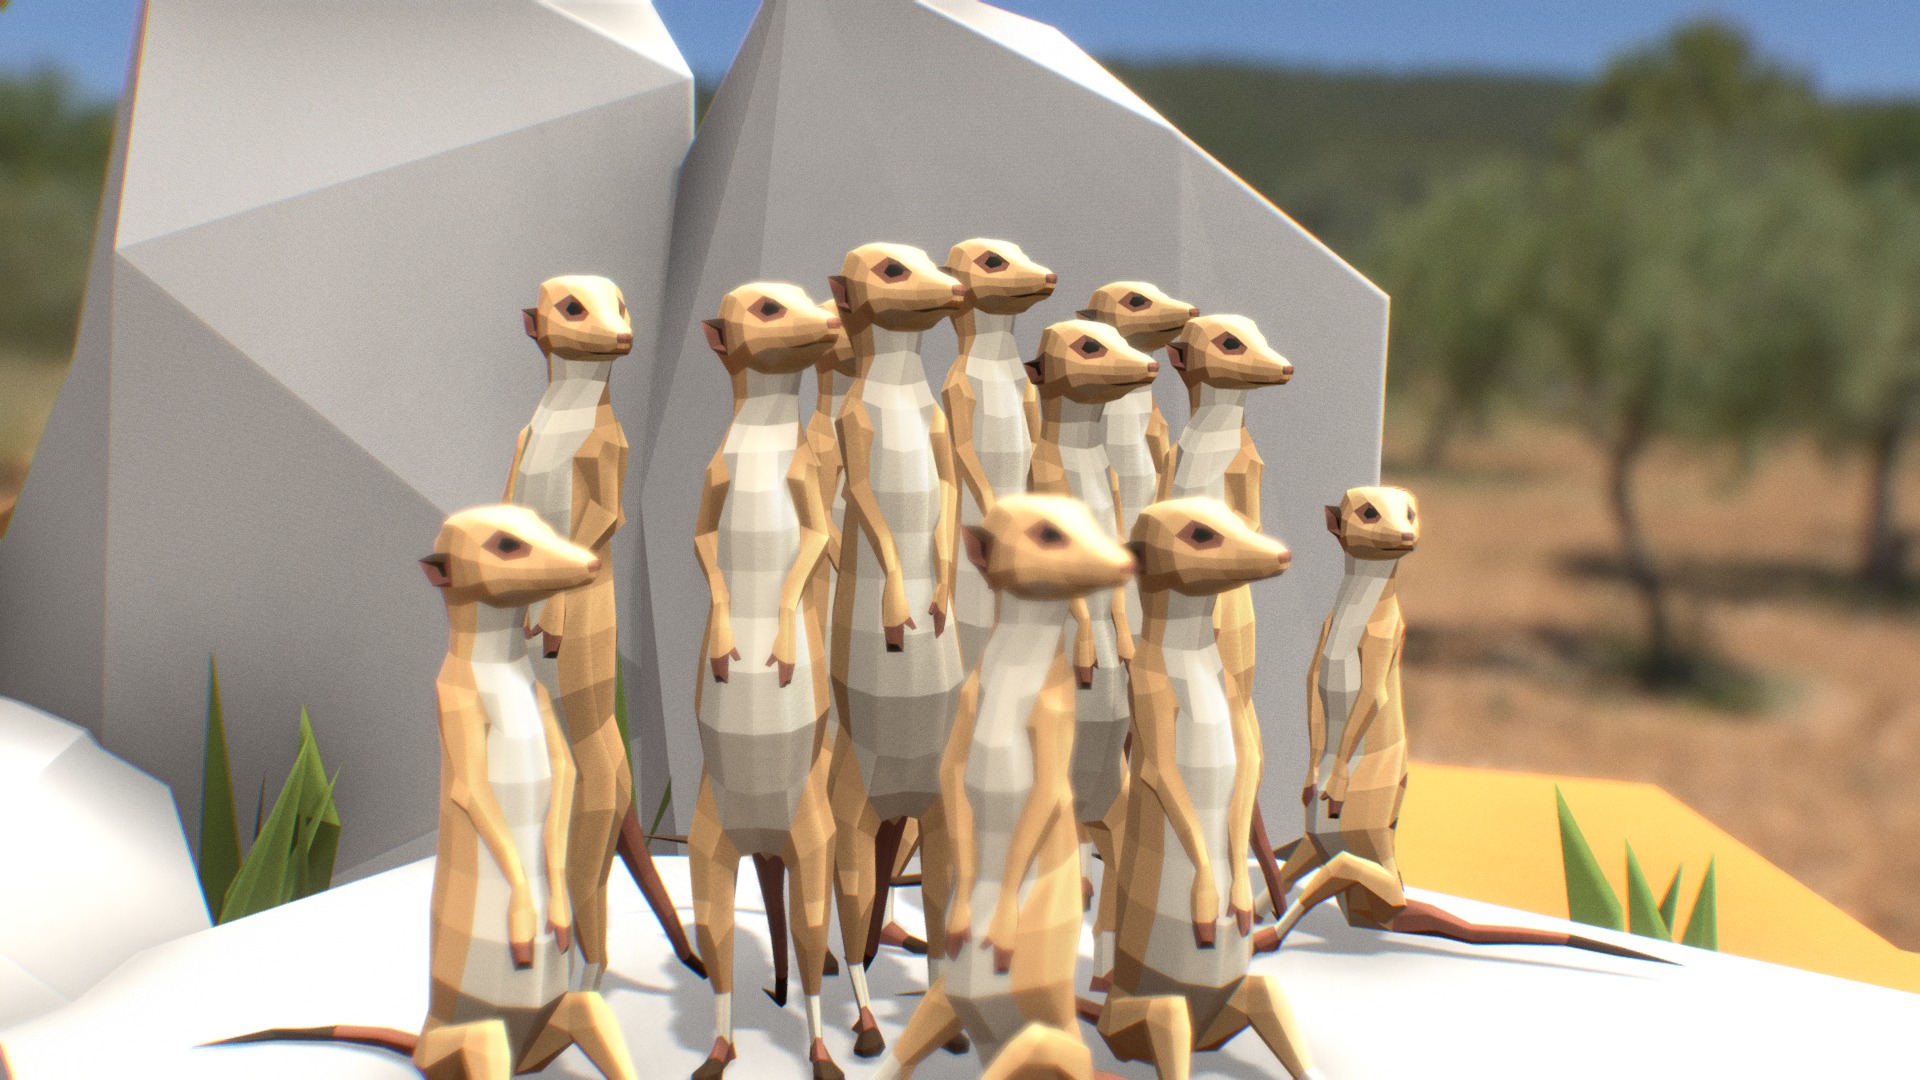 3D model Meerkats - This is a 3D model of the Meerkats. The 3D model is about a group of birds on a table.